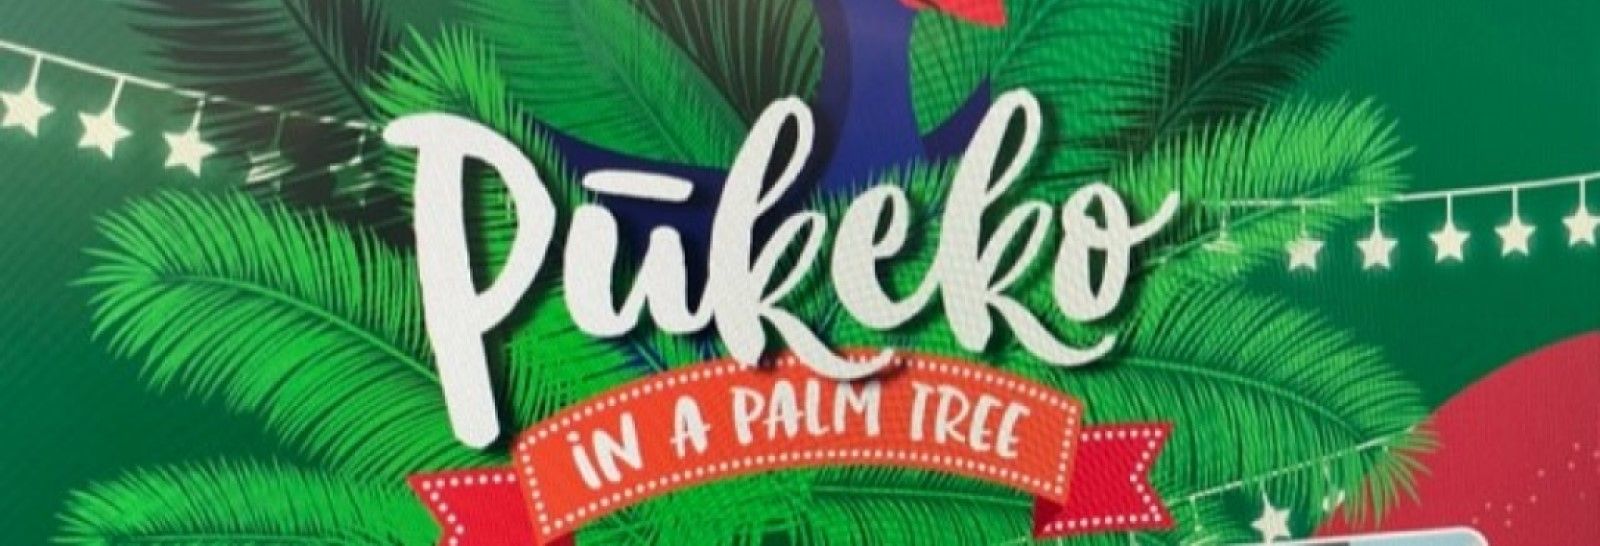 Pukeko in a palm tree banner image